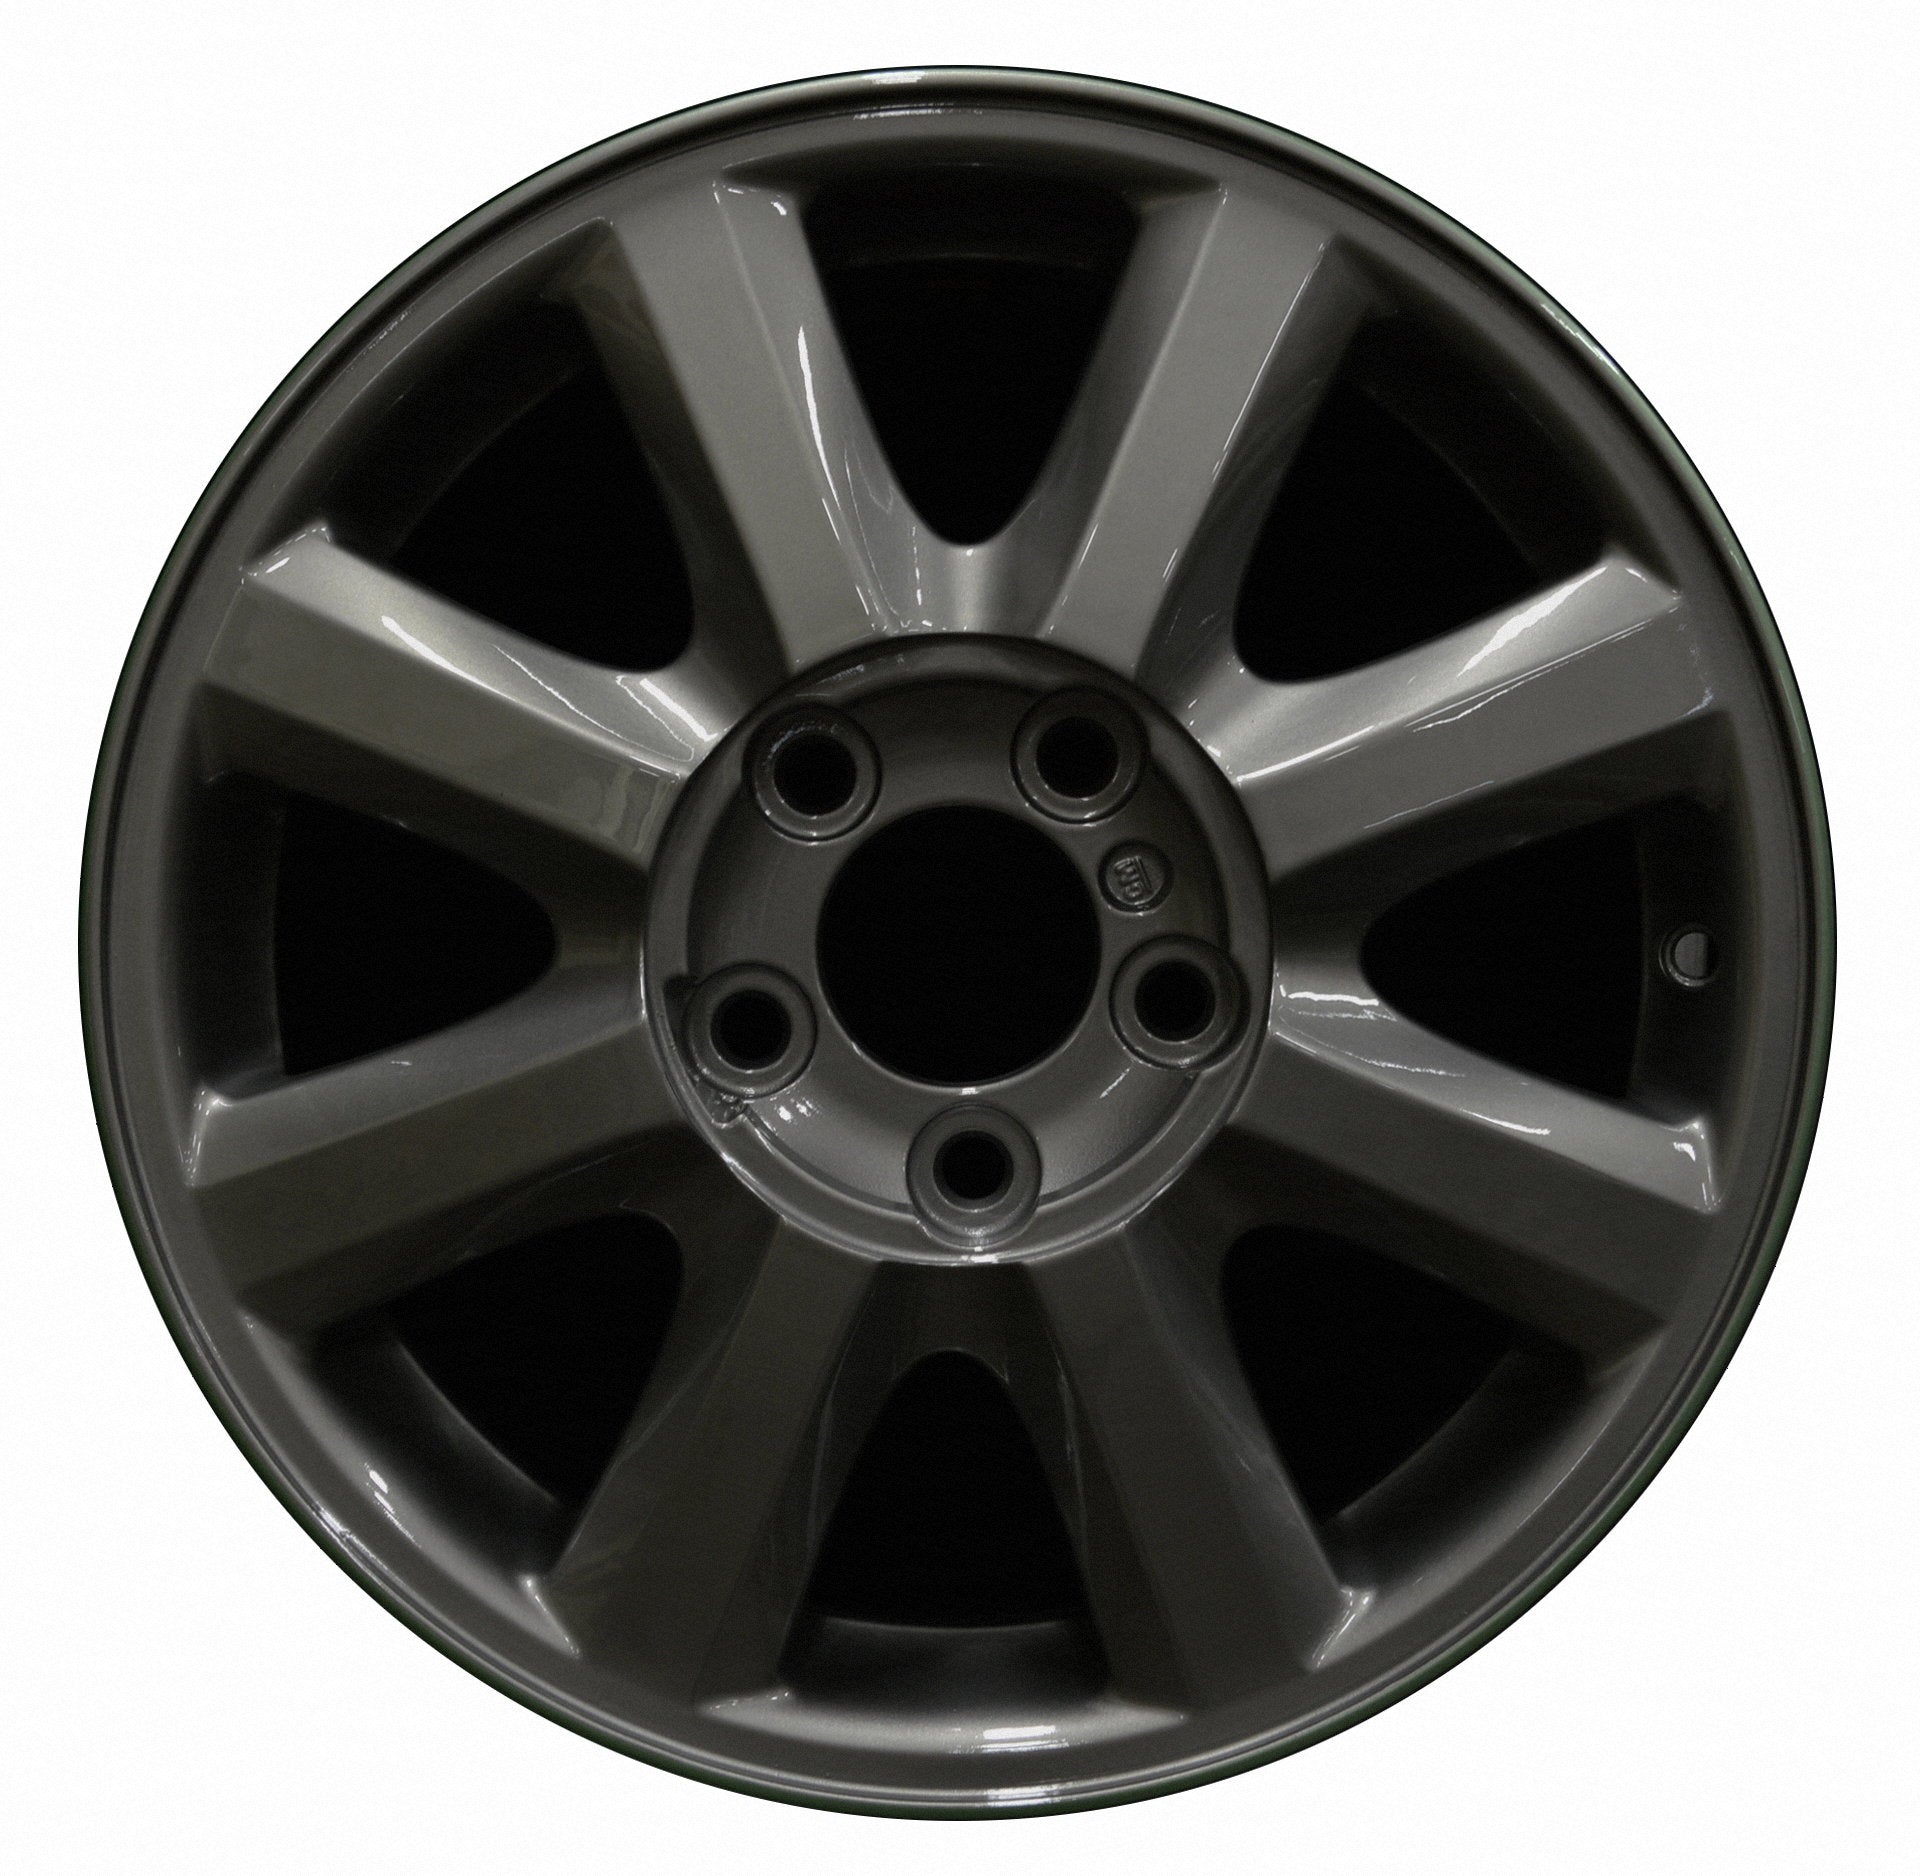 Buick Allure  2005, 2006, 2007, 2008, 2009 Factory OEM Car Wheel Size 16x6.5 Alloy WAO.4056.LC22.FF